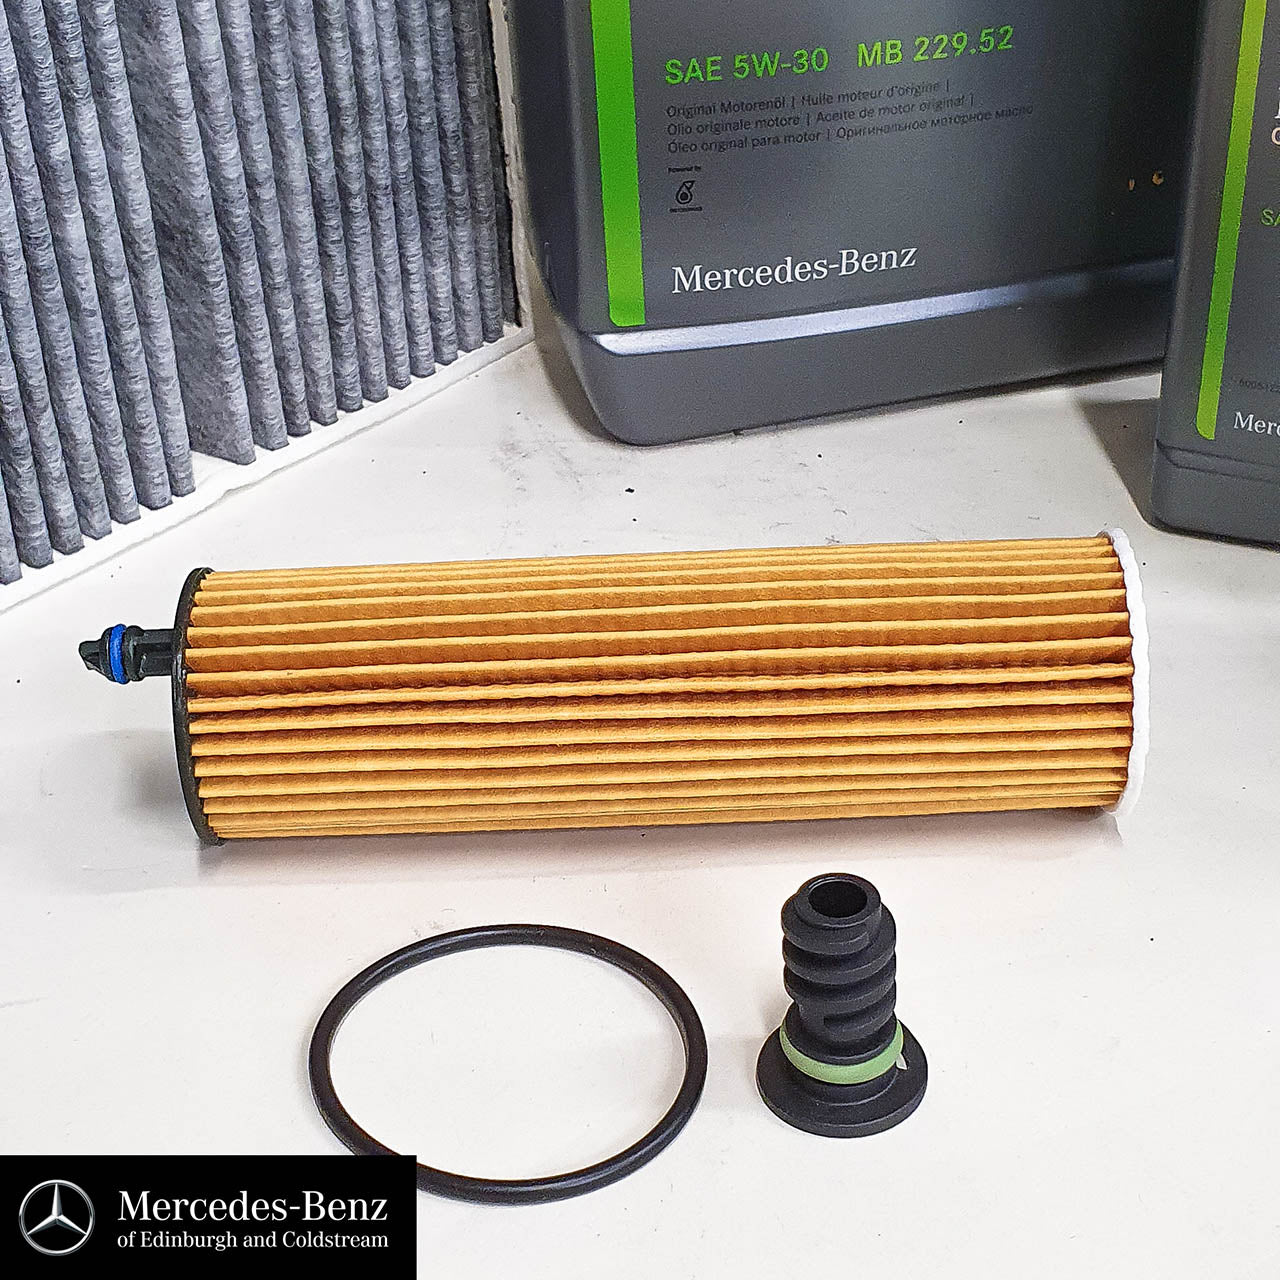 Genuine Mercedes Service Kit E Class w213 OM654 DIESEL engine oil and filters - service kit